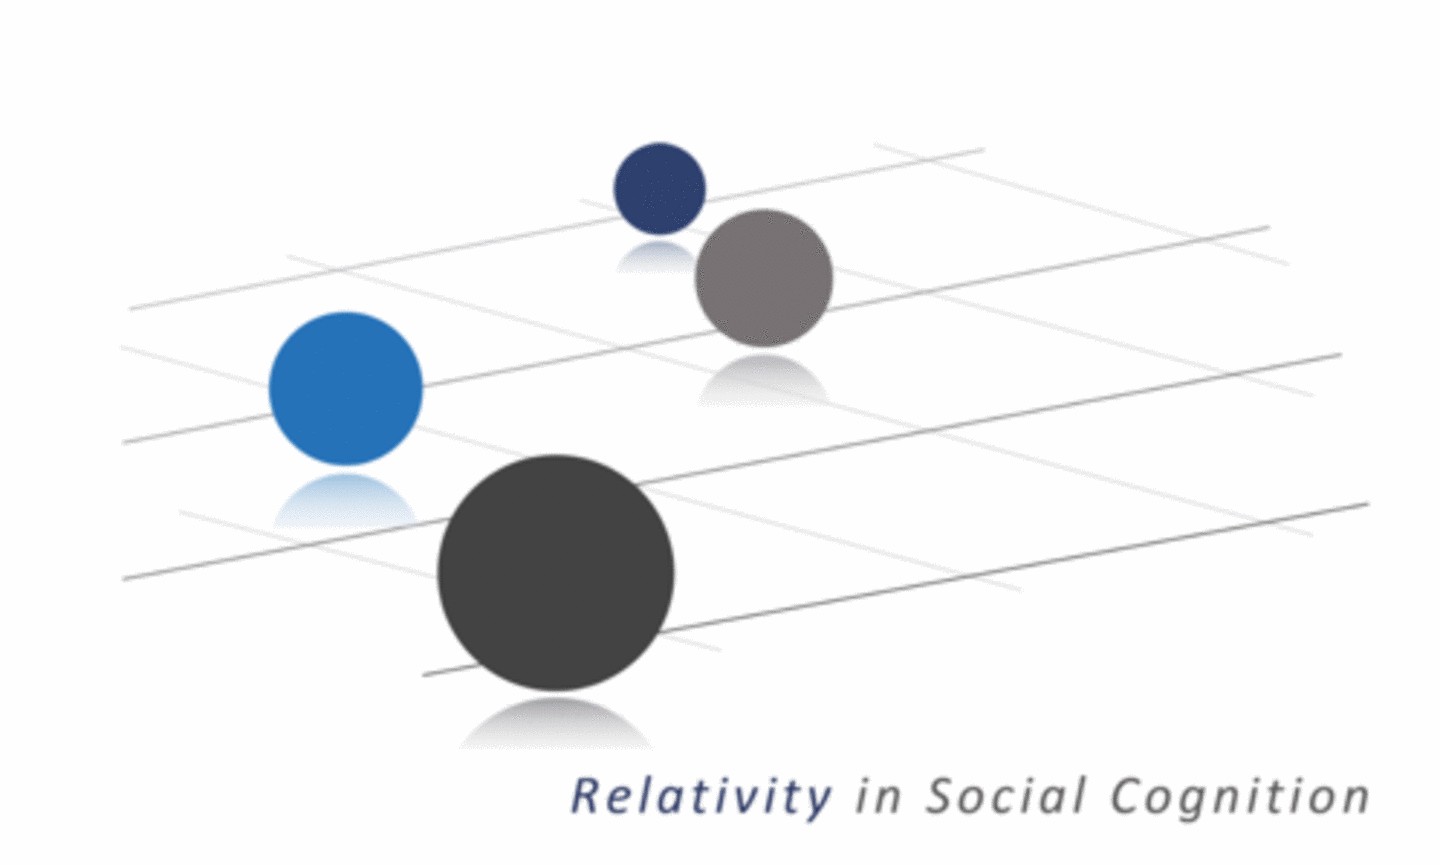 DFG Research Unit - "Relativity in Social Cognition"